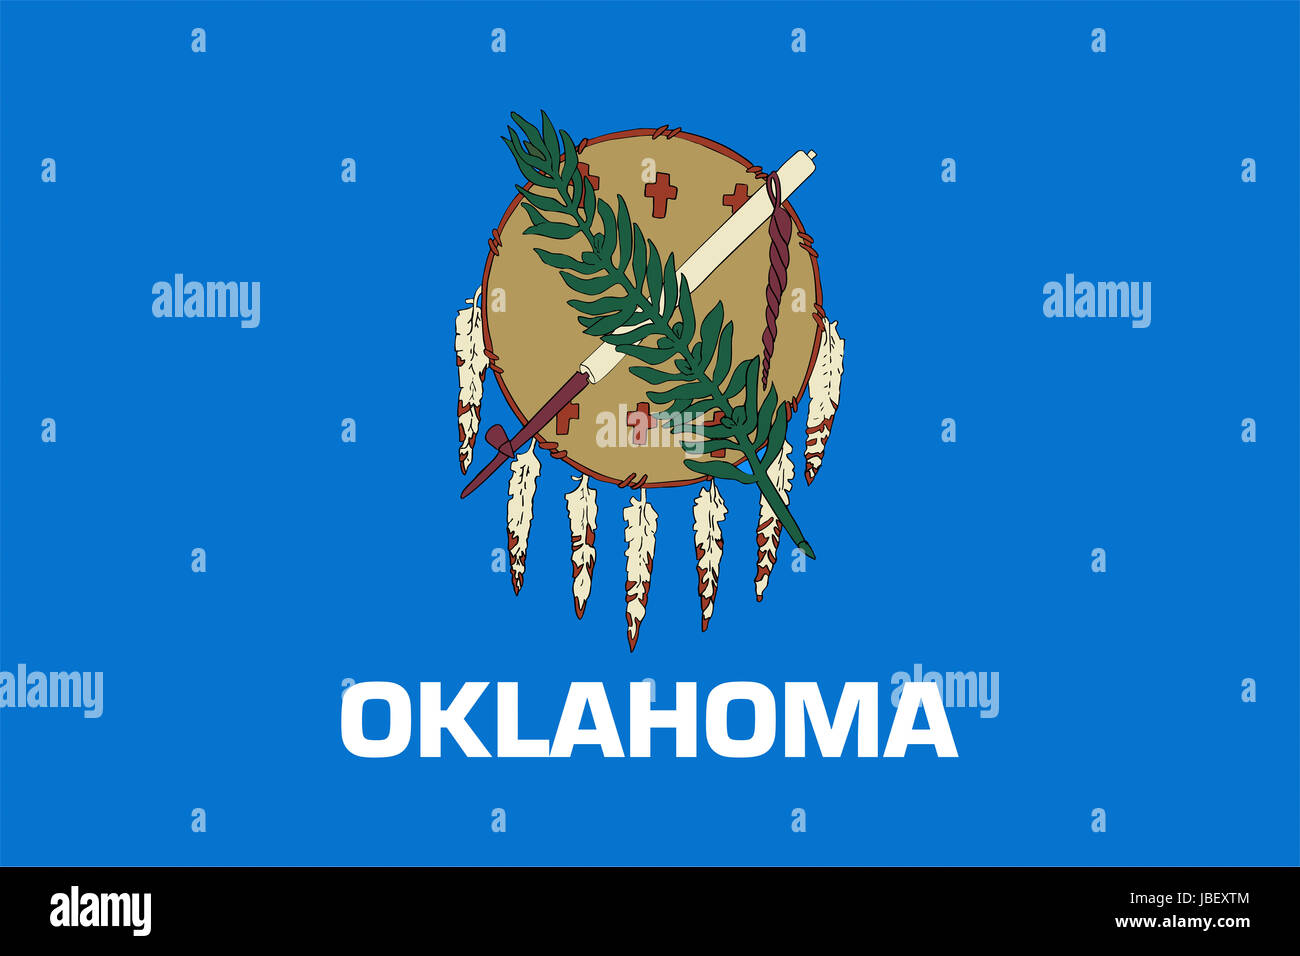 Illustration of the flag of Oklahomastate in America Stock Photo